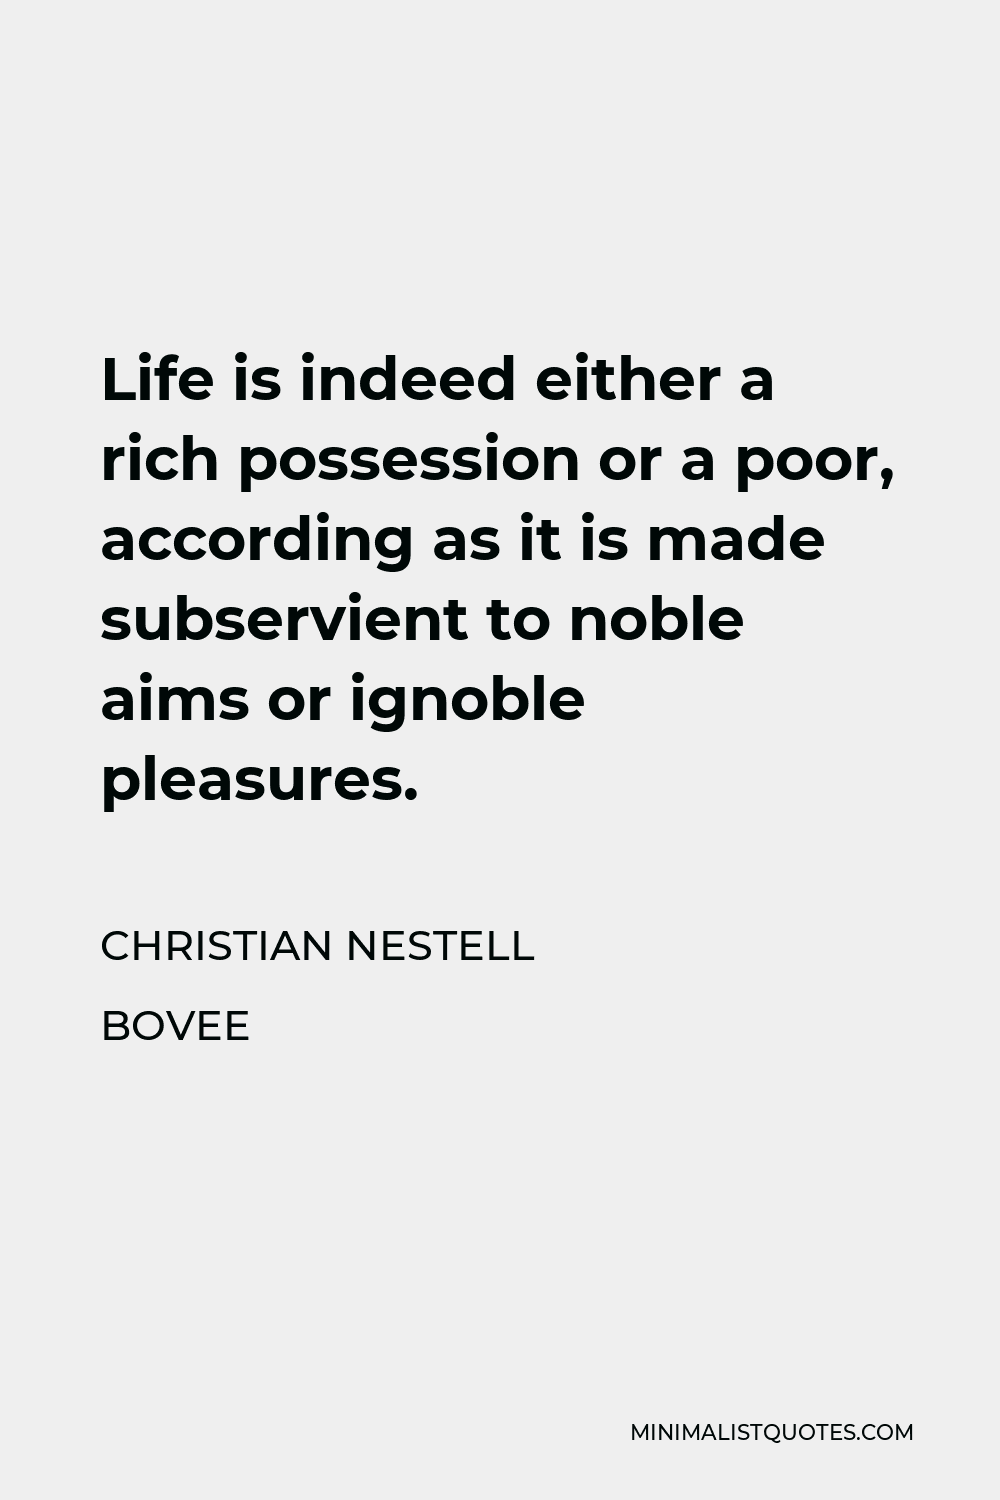 Christian Nestell Bovee Quote - Life is indeed either a rich possession or a poor, according as it is made subservient to noble aims or ignoble pleasures.